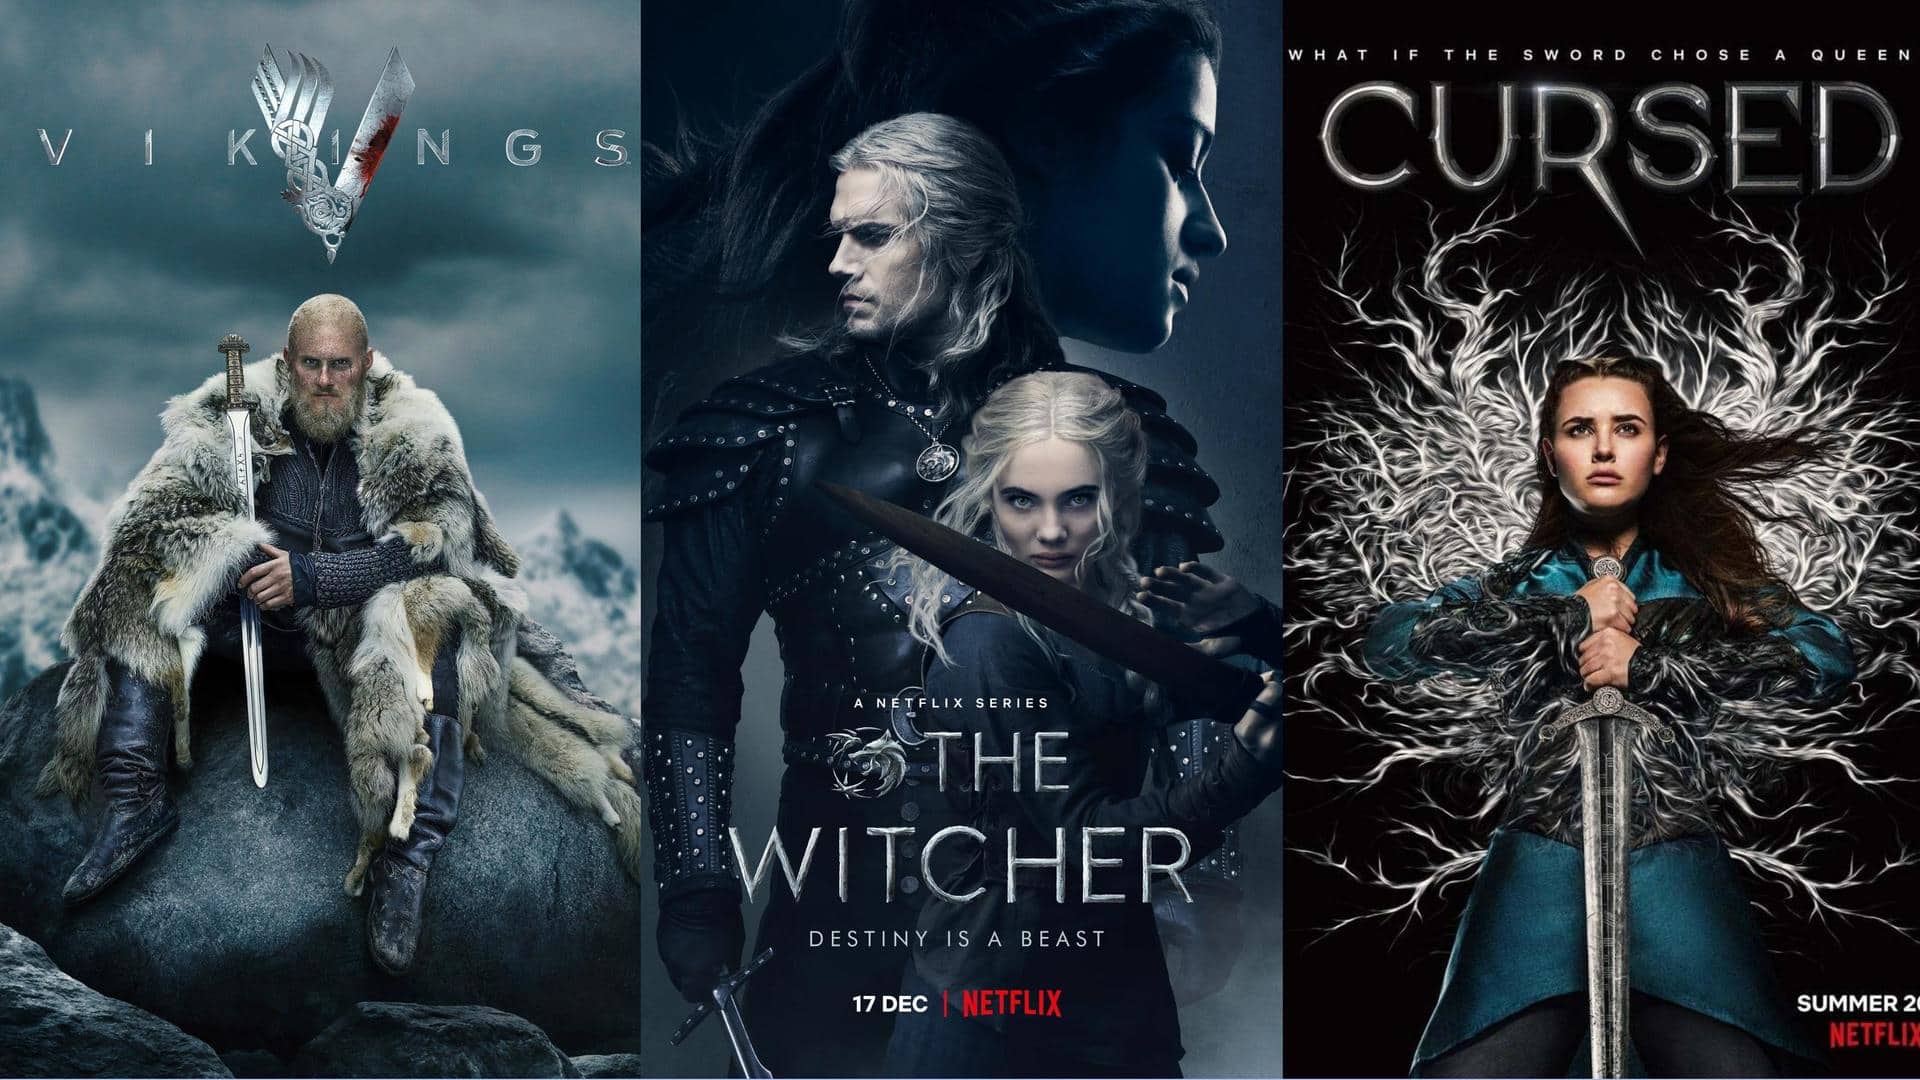 If you liked 'The Witcher,' check out these similar shows